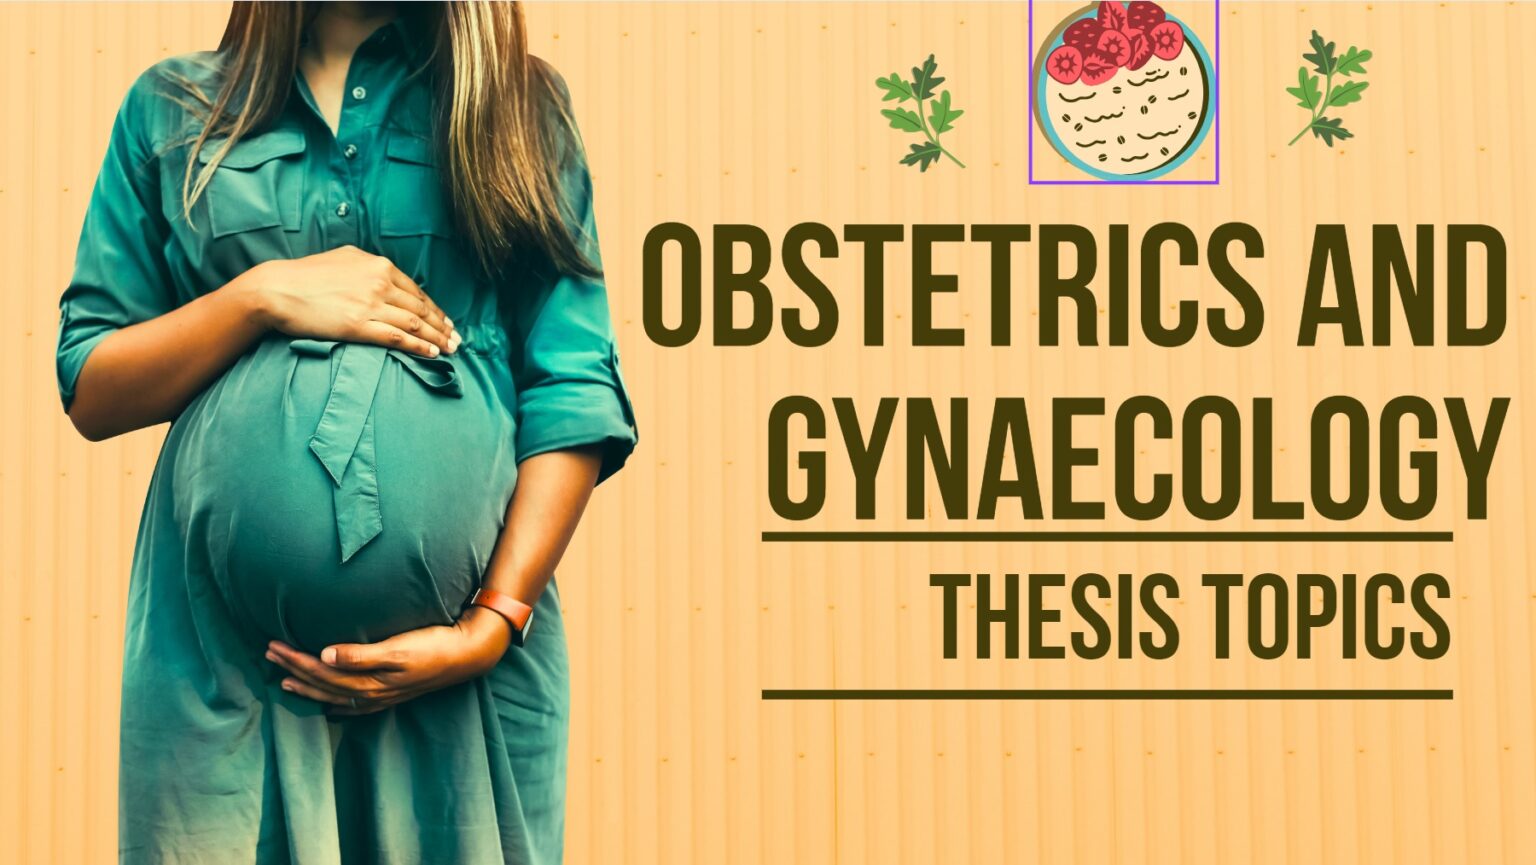 thesis topics in obstetrics and gynaecology in aiims